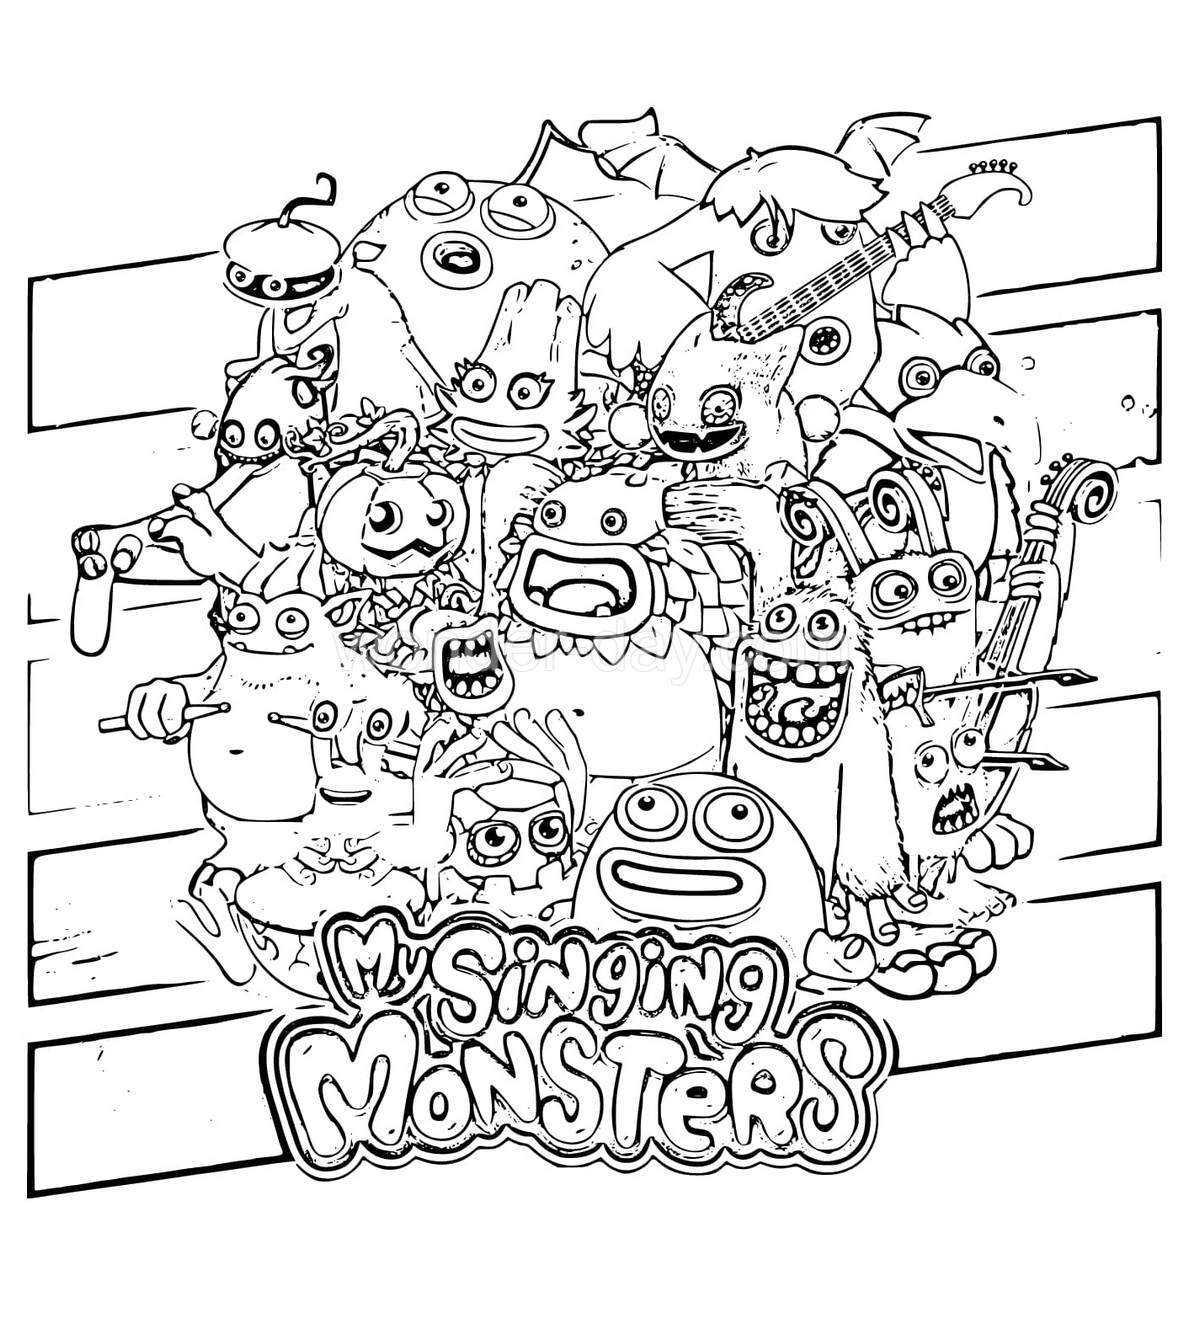 My Singing Monsters Coloring Pages | WONDER DAY — Coloring pages for ...